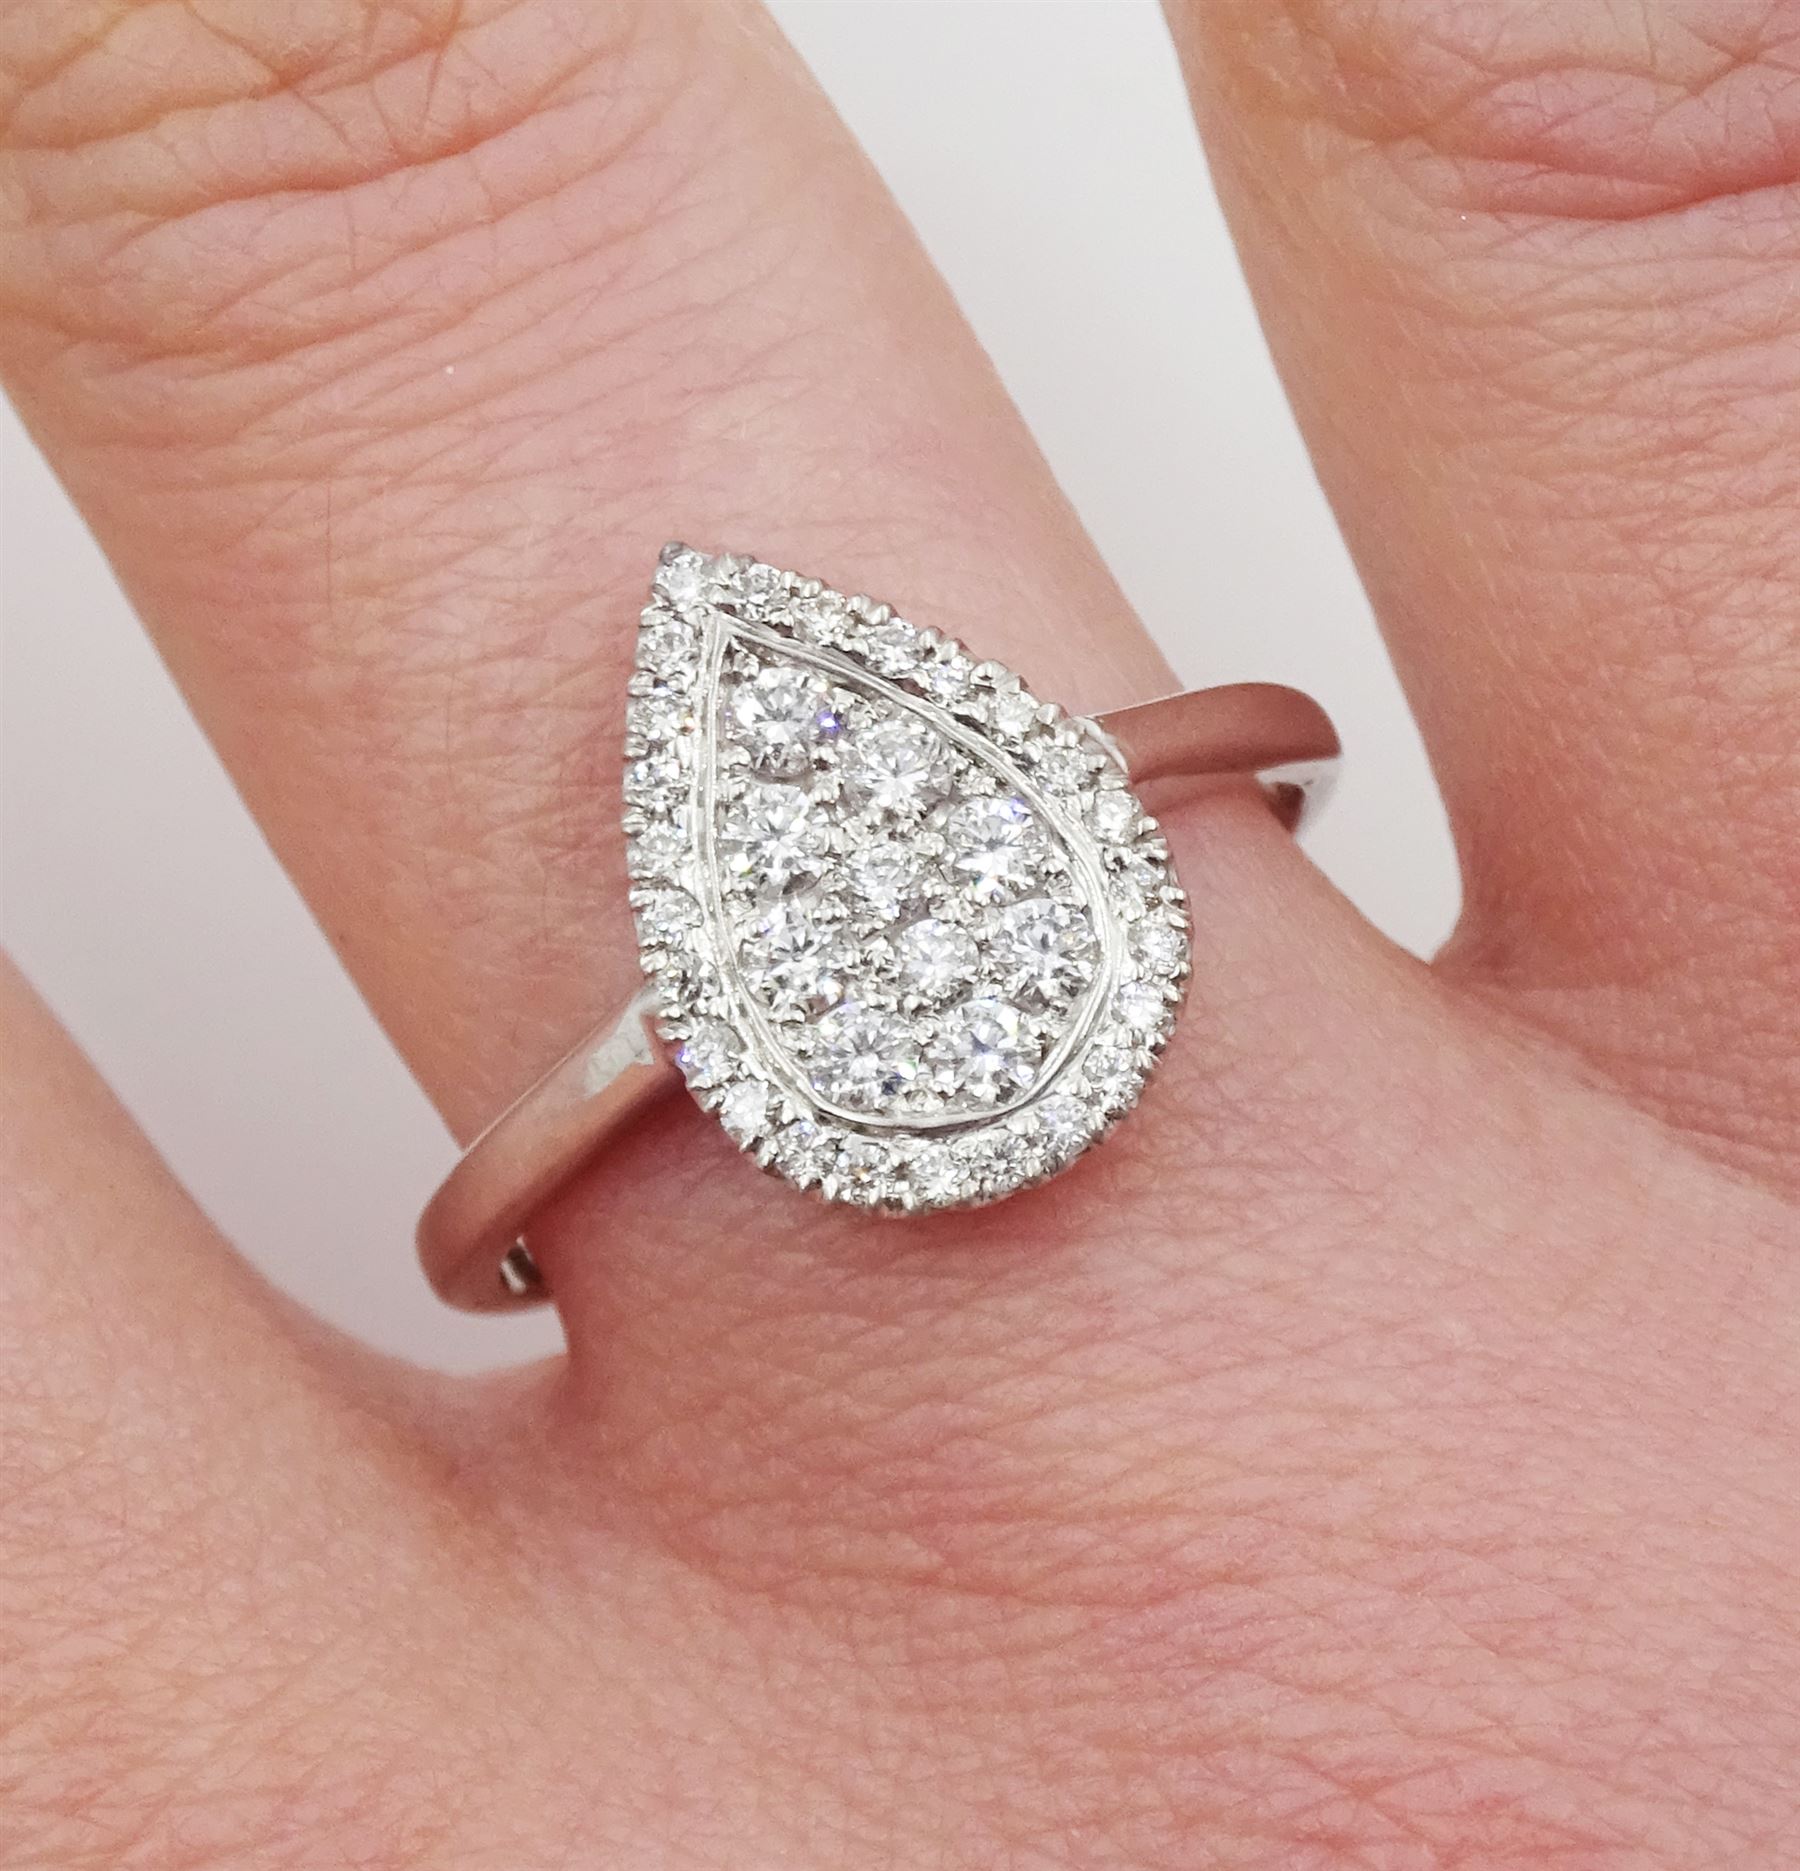 18ct white gold pave set diamond pear shaped ring - Image 2 of 4